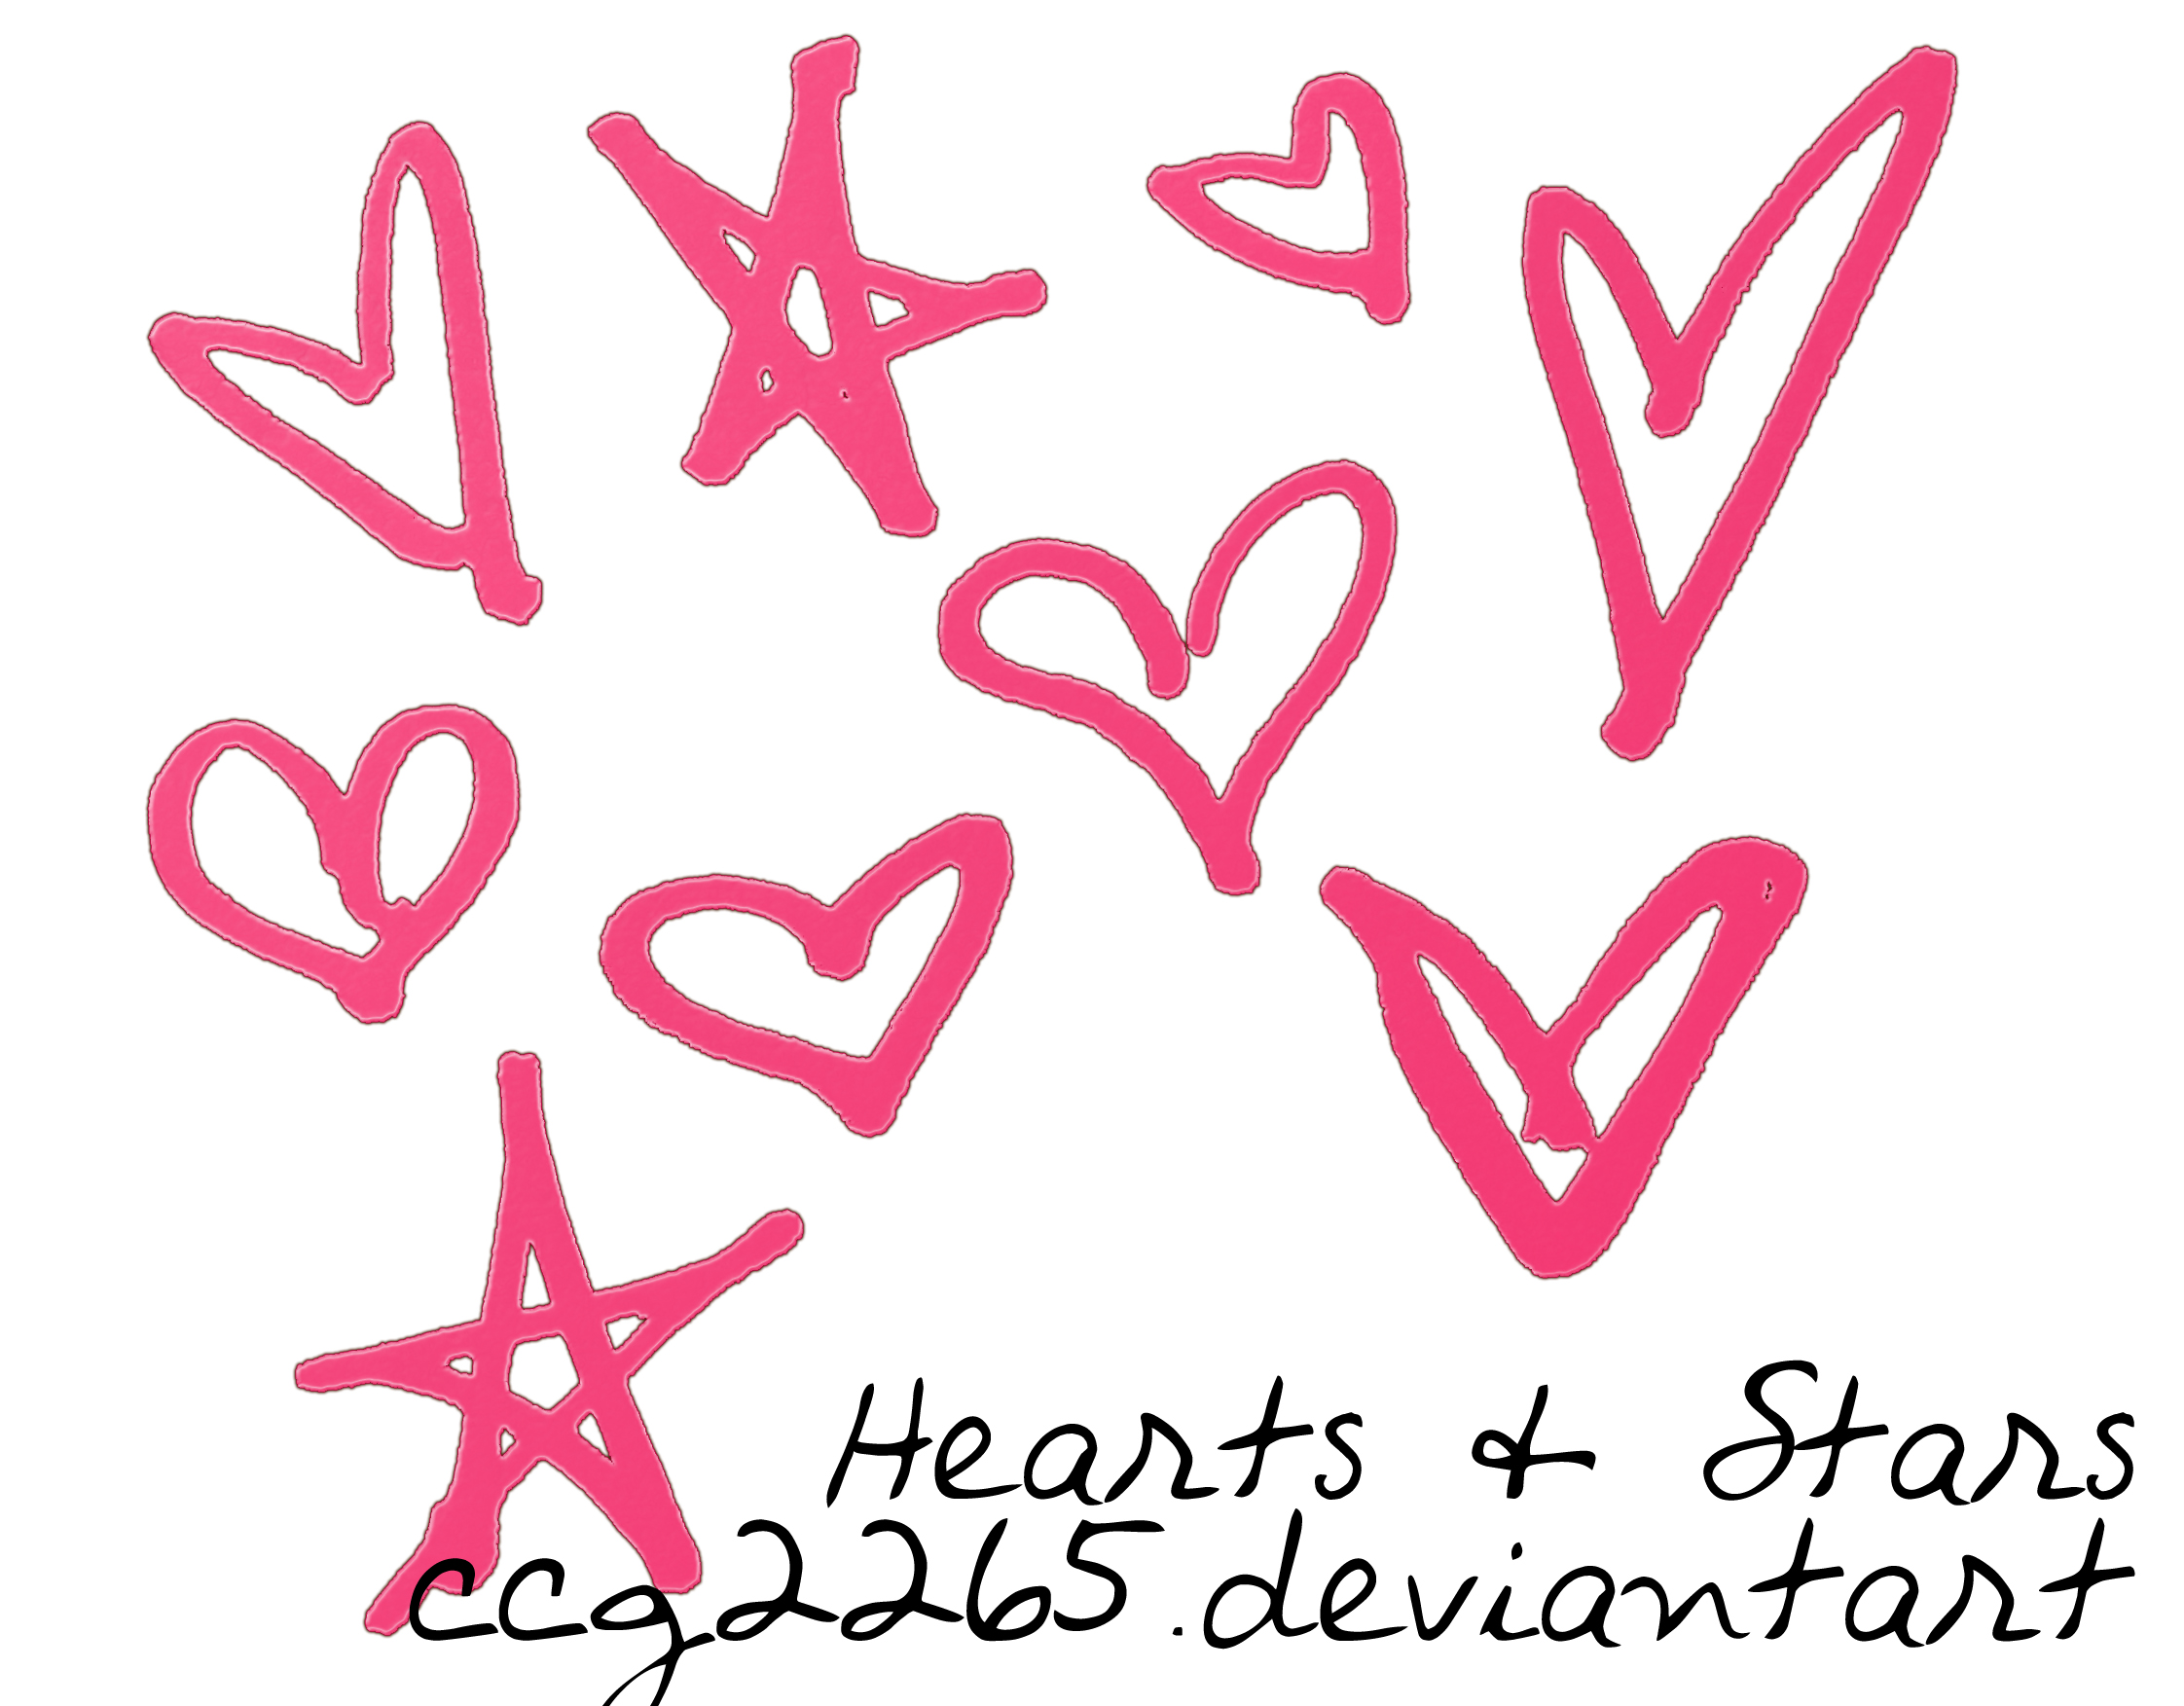 Hearts and Stars by ccg2265 on DeviantArt